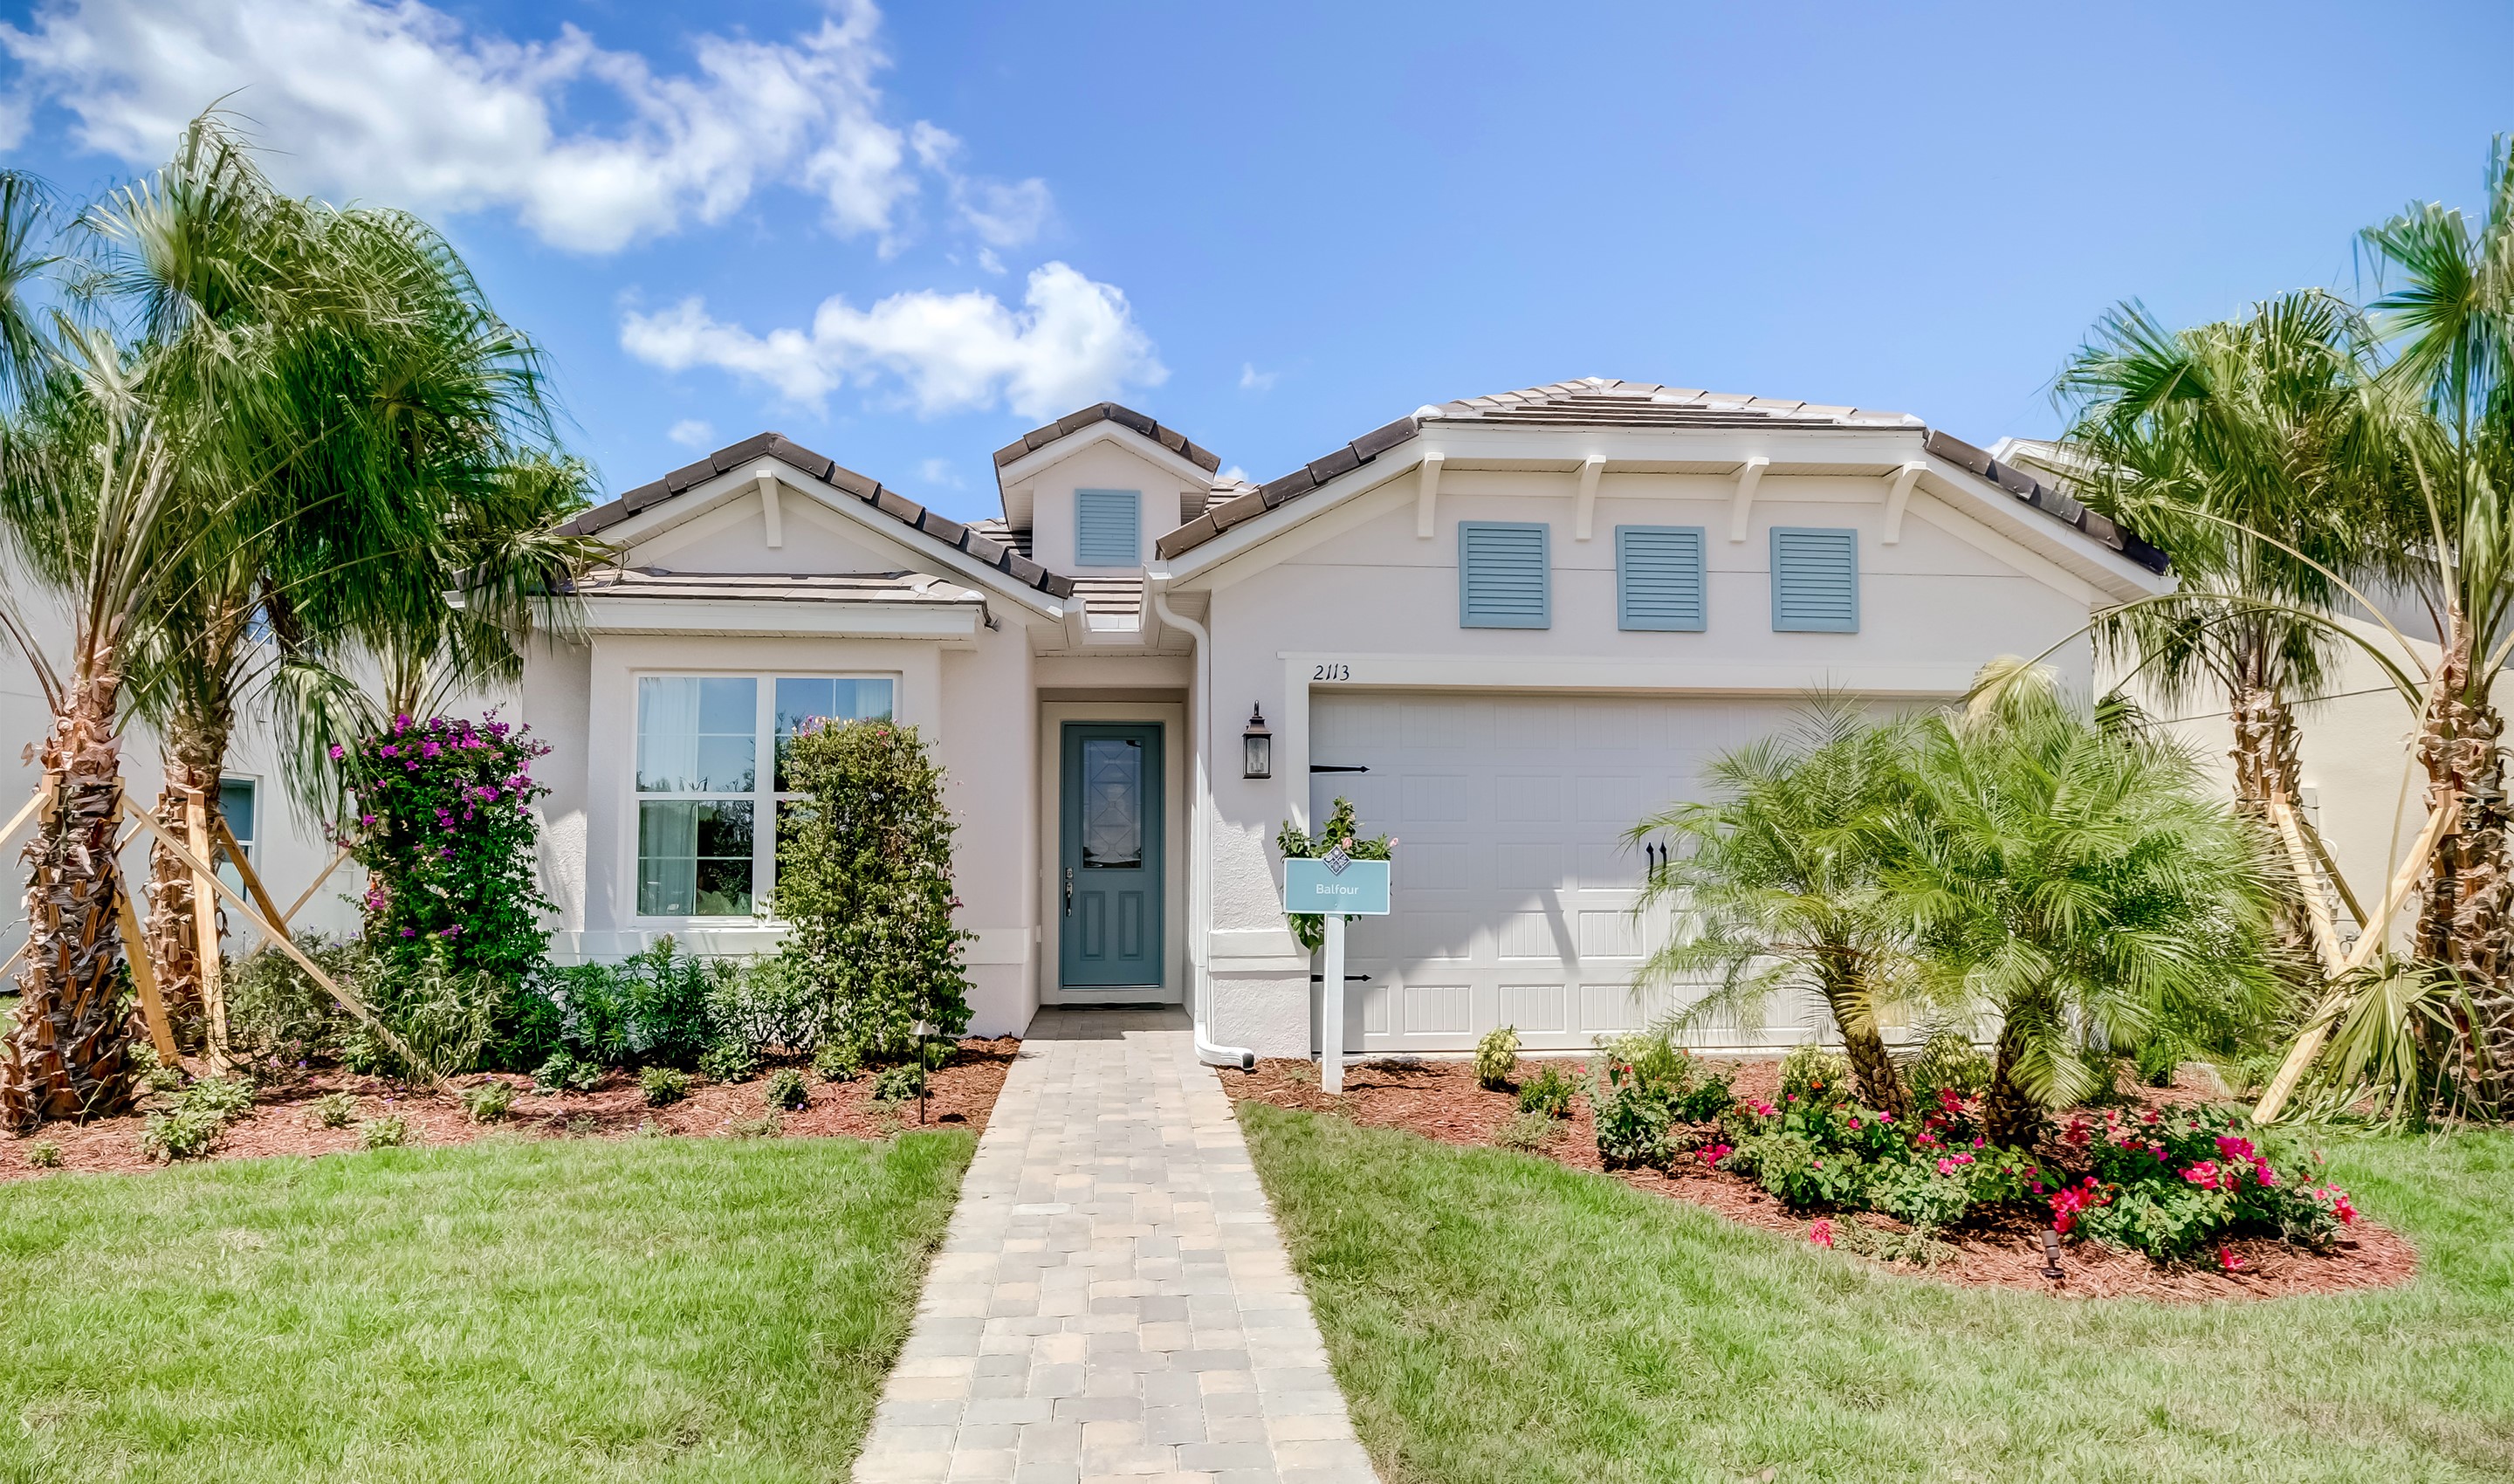 K Hovnanian S Four Seasons At Orlando 55 Community In Kissimmee Fl